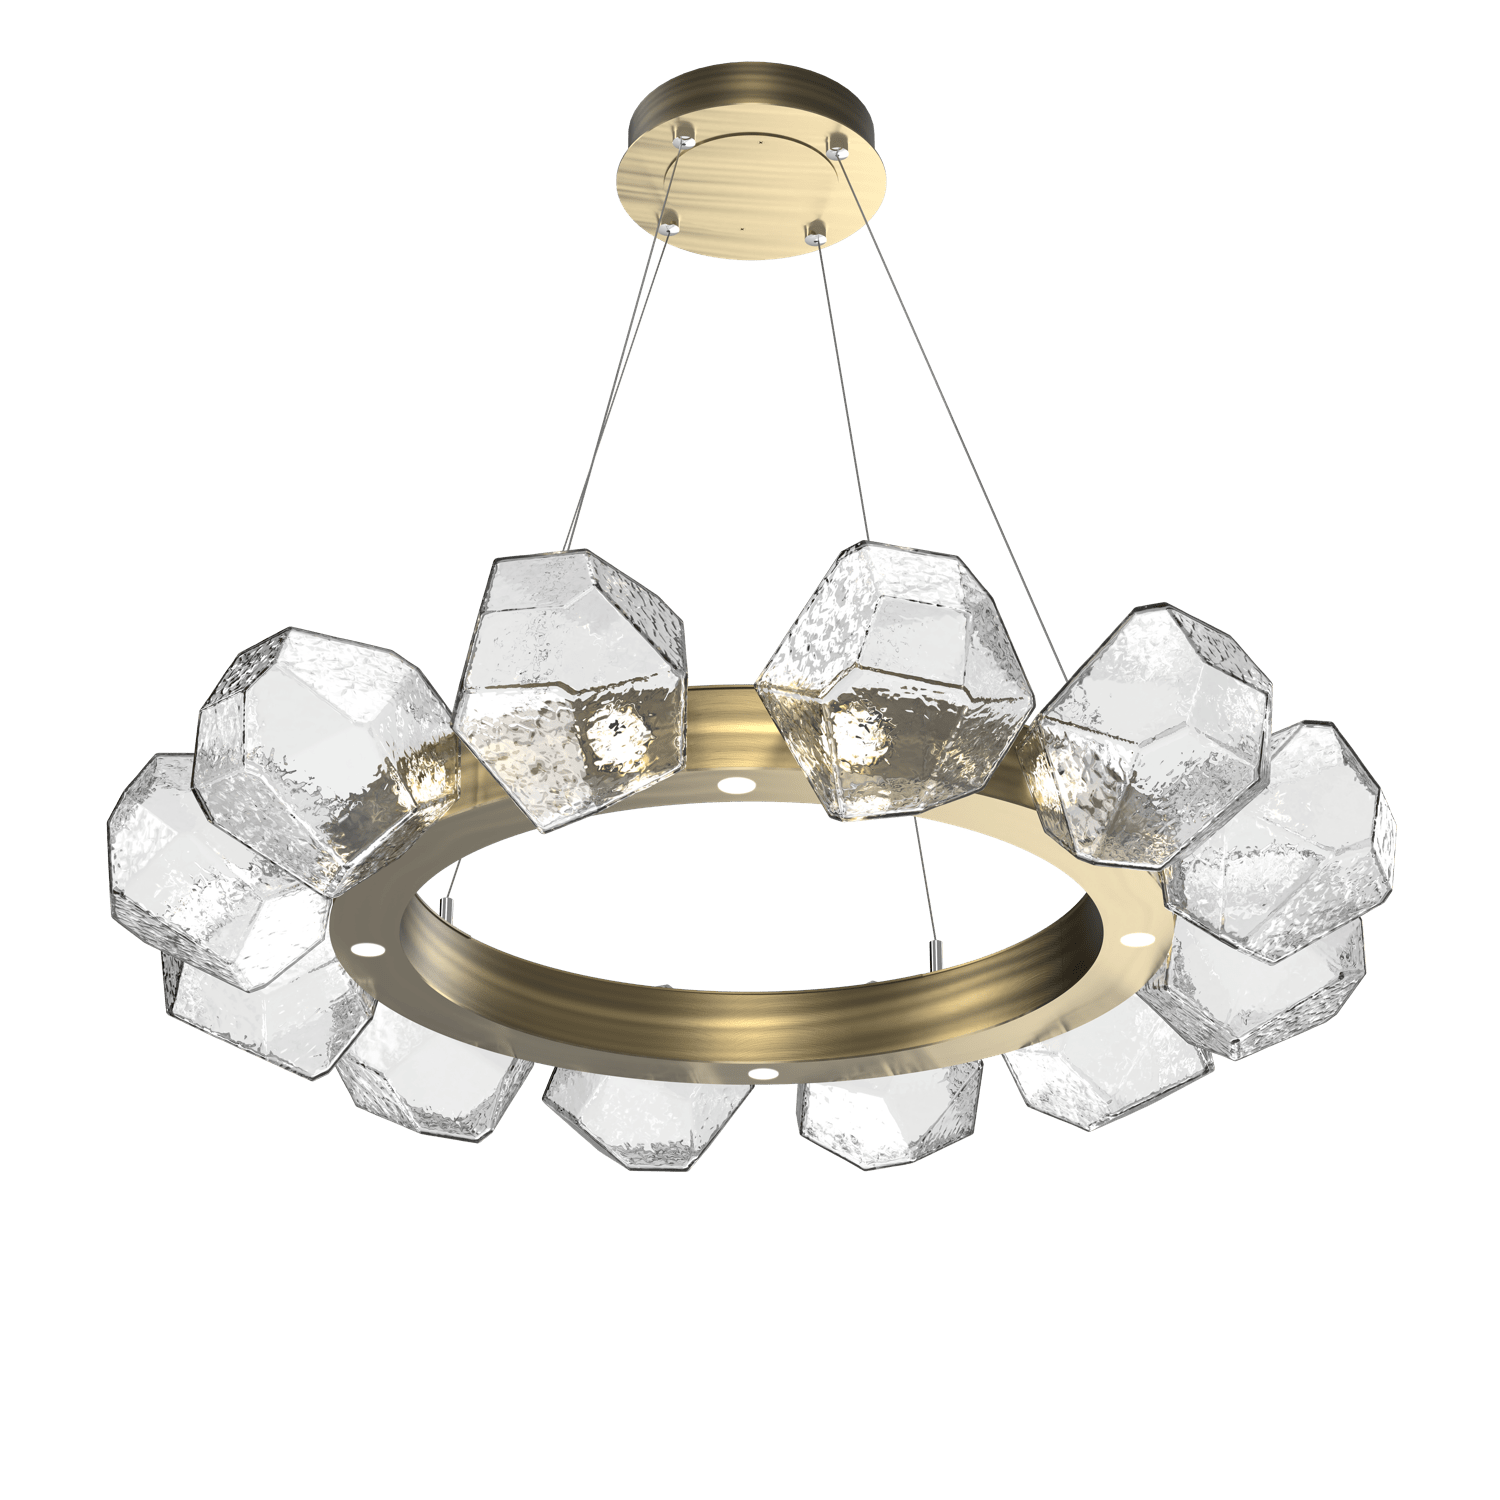 CHB0039-36-HB-C-Hammerton-Studio-Gem-36-inch-radial-ring-chandelier-with-heritage-brass-finish-and-clear-blown-glass-shades-and-LED-lamping